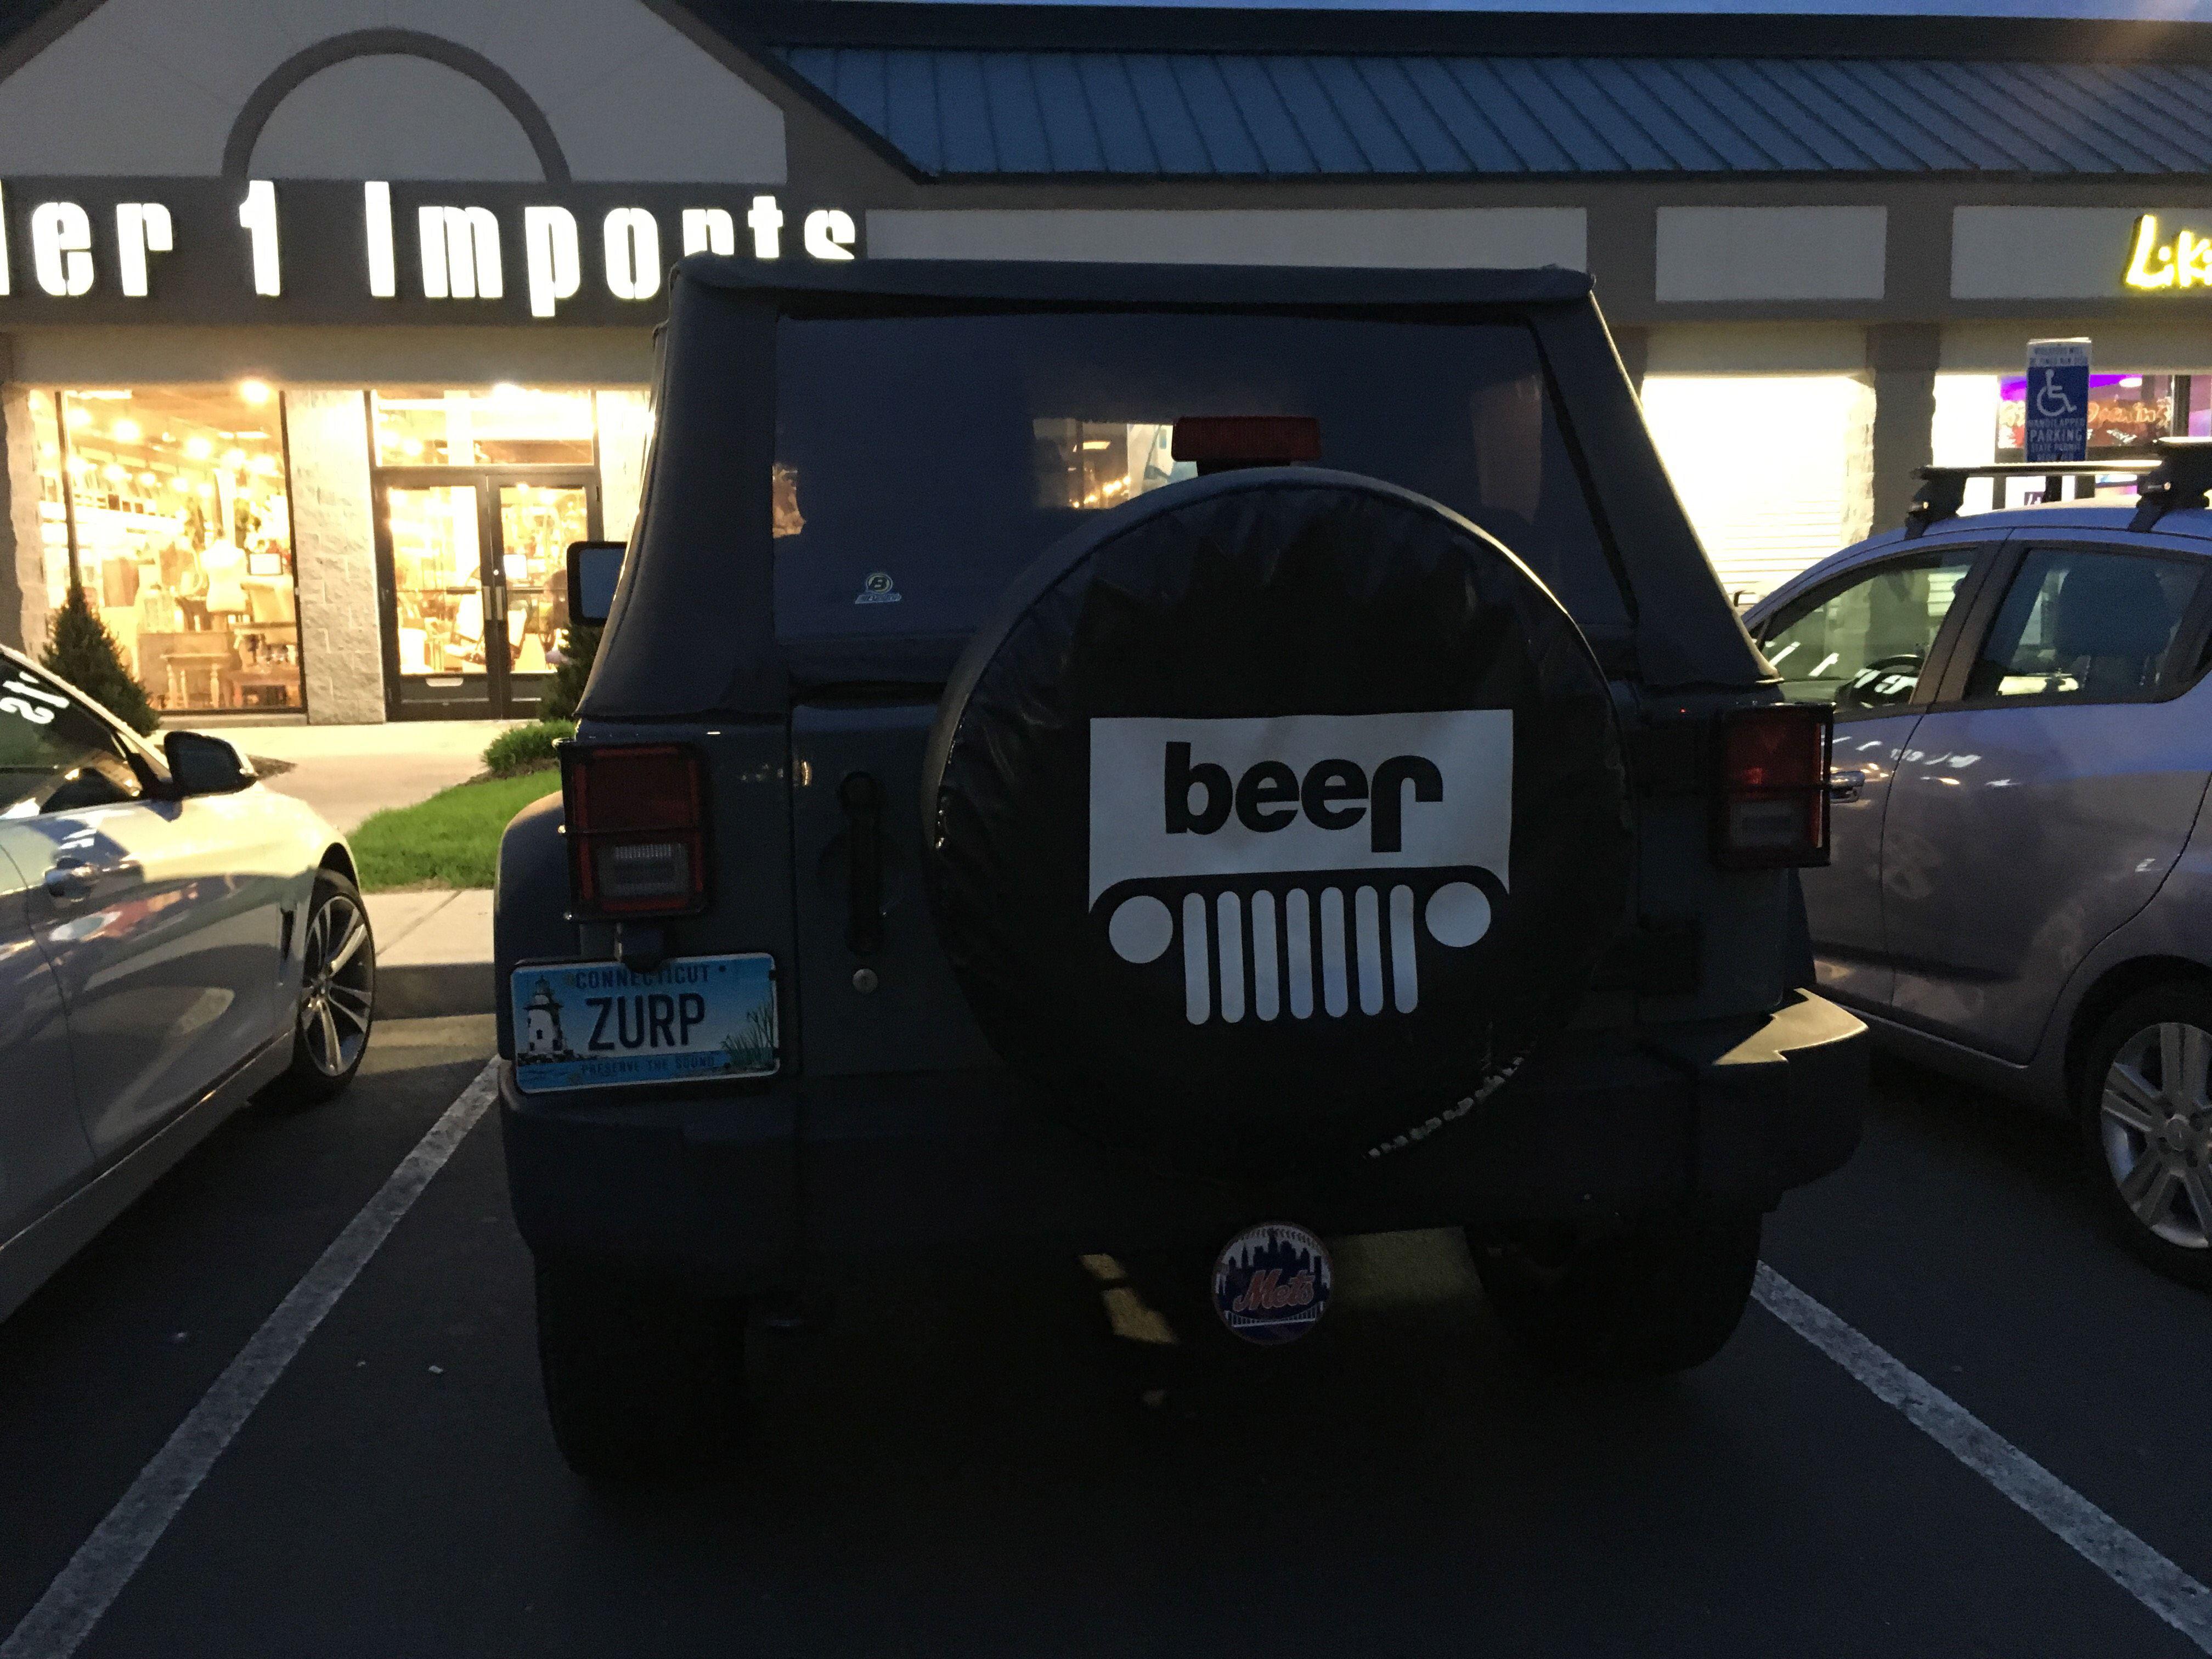 Funny Jeep Logo - That was pretty clever. Turning the jeep logo upside down? I see